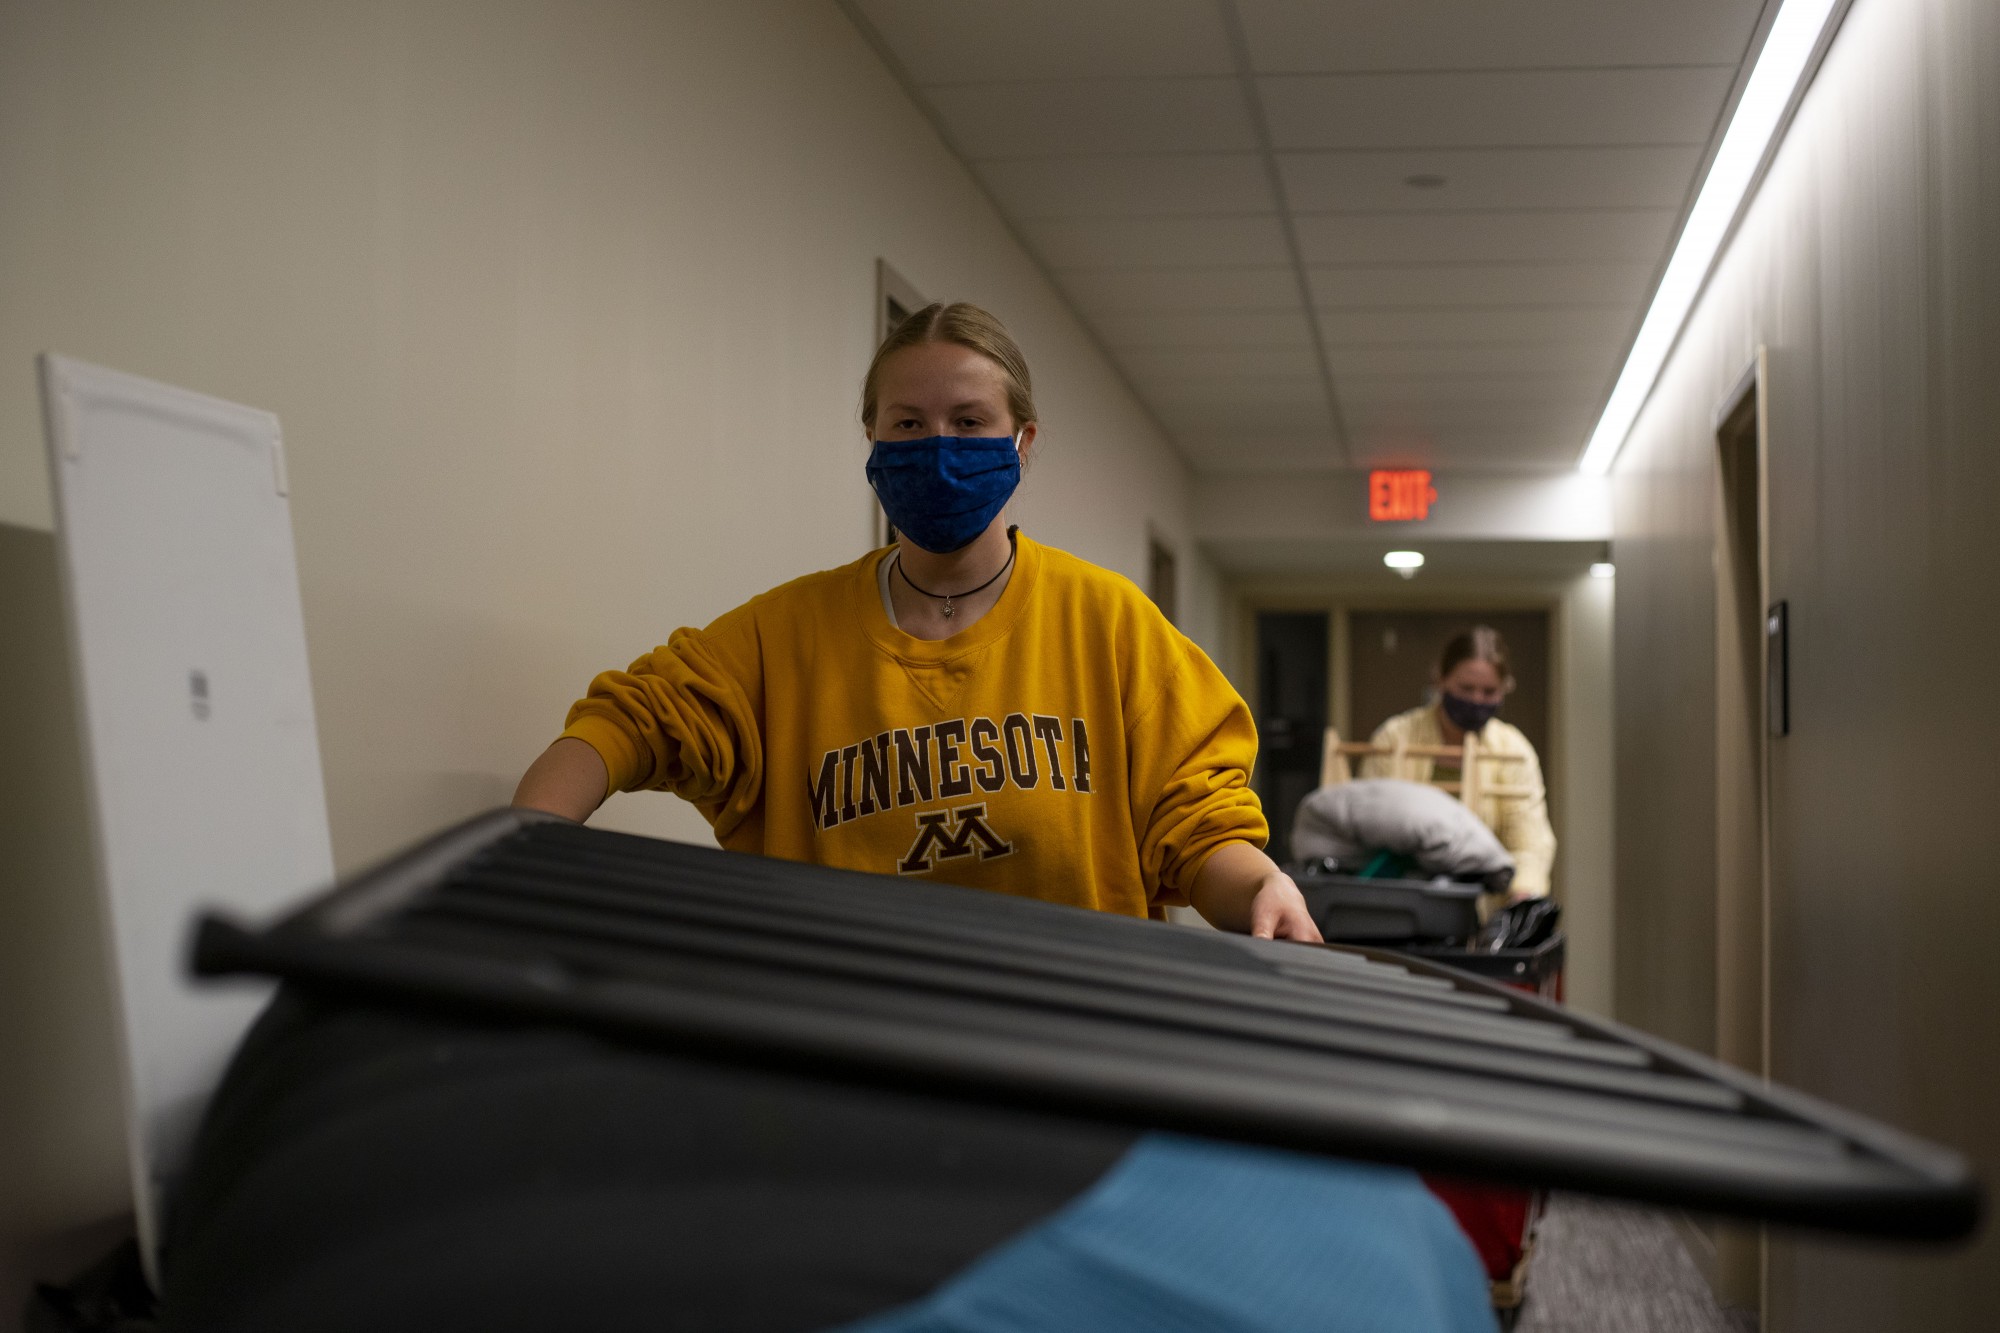 11:15 a.m.
Freshman Nellie Benton returns to Pioneer Hall to move her remaining belongings out of her dorm room, which was vacated at the end of March. 